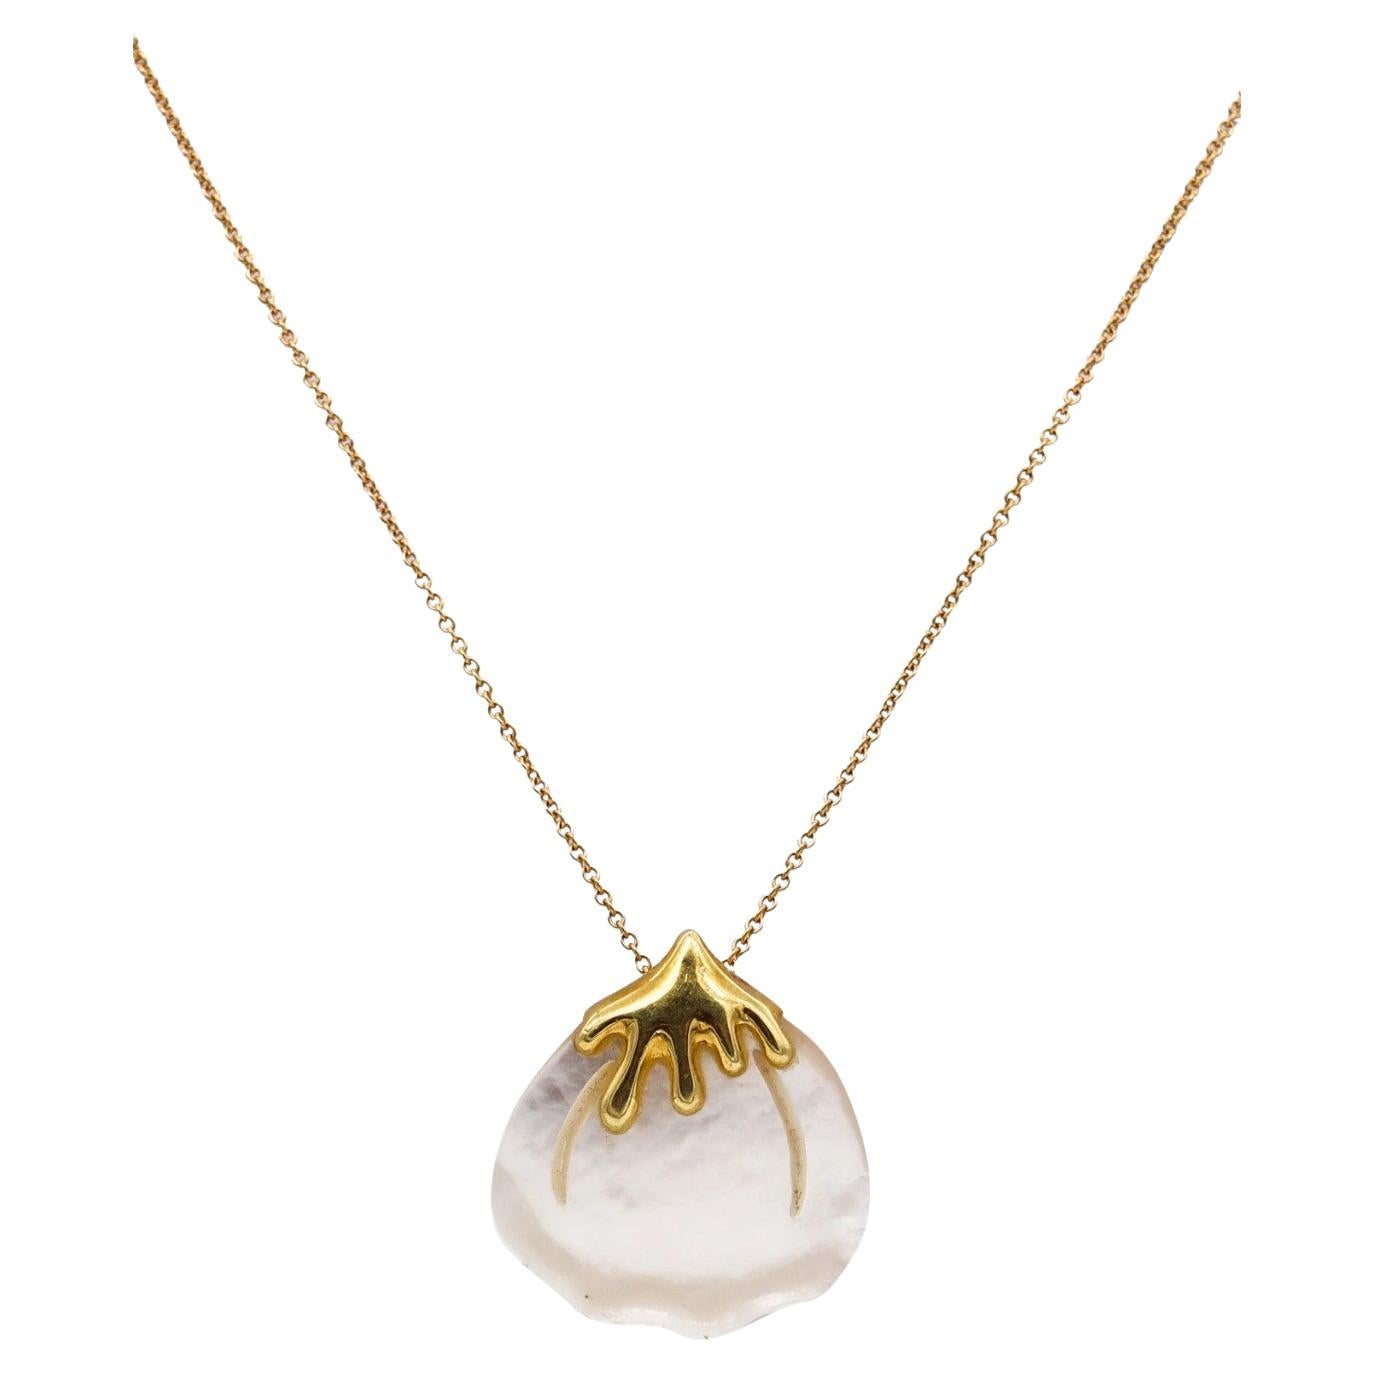 Tiffany & Co 1976 Angela Cummings White Nacre Petal Necklace in 18kt Yellow Gold For Sale